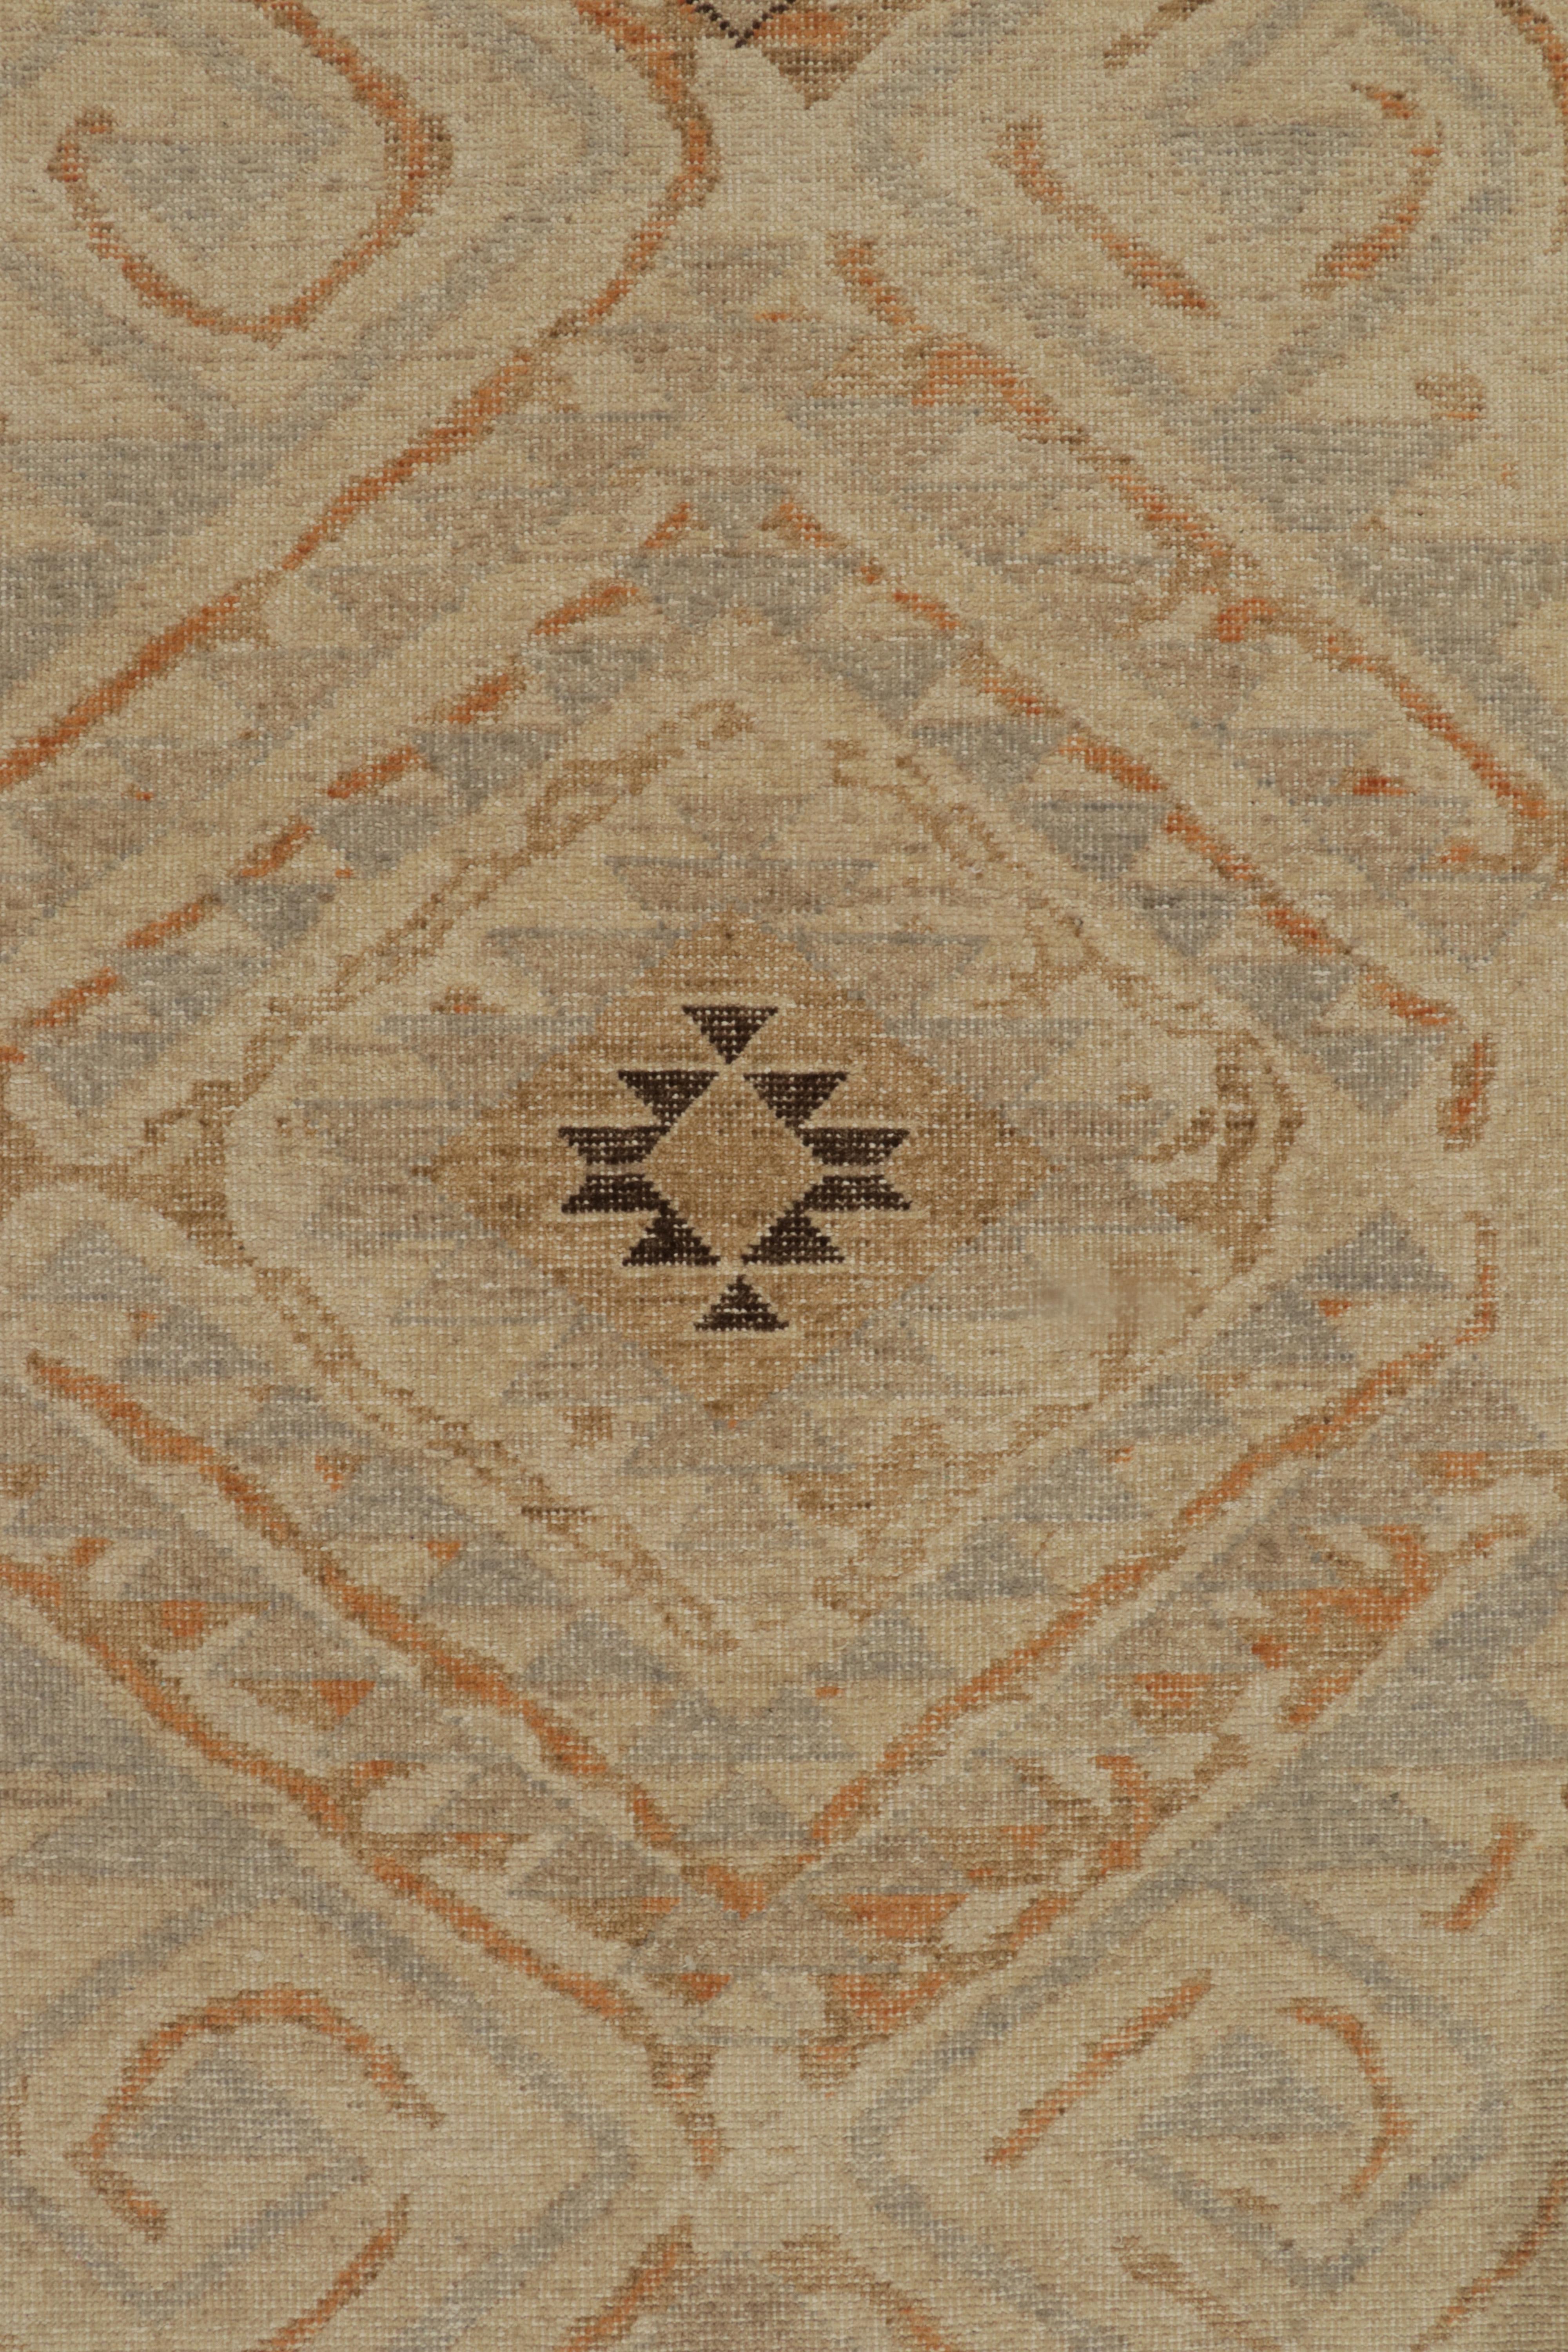 Hand-Knotted Rug & Kilim’s Distressed Style Rug in Beige-Brown, Blue & Rust Tribal Patterns For Sale